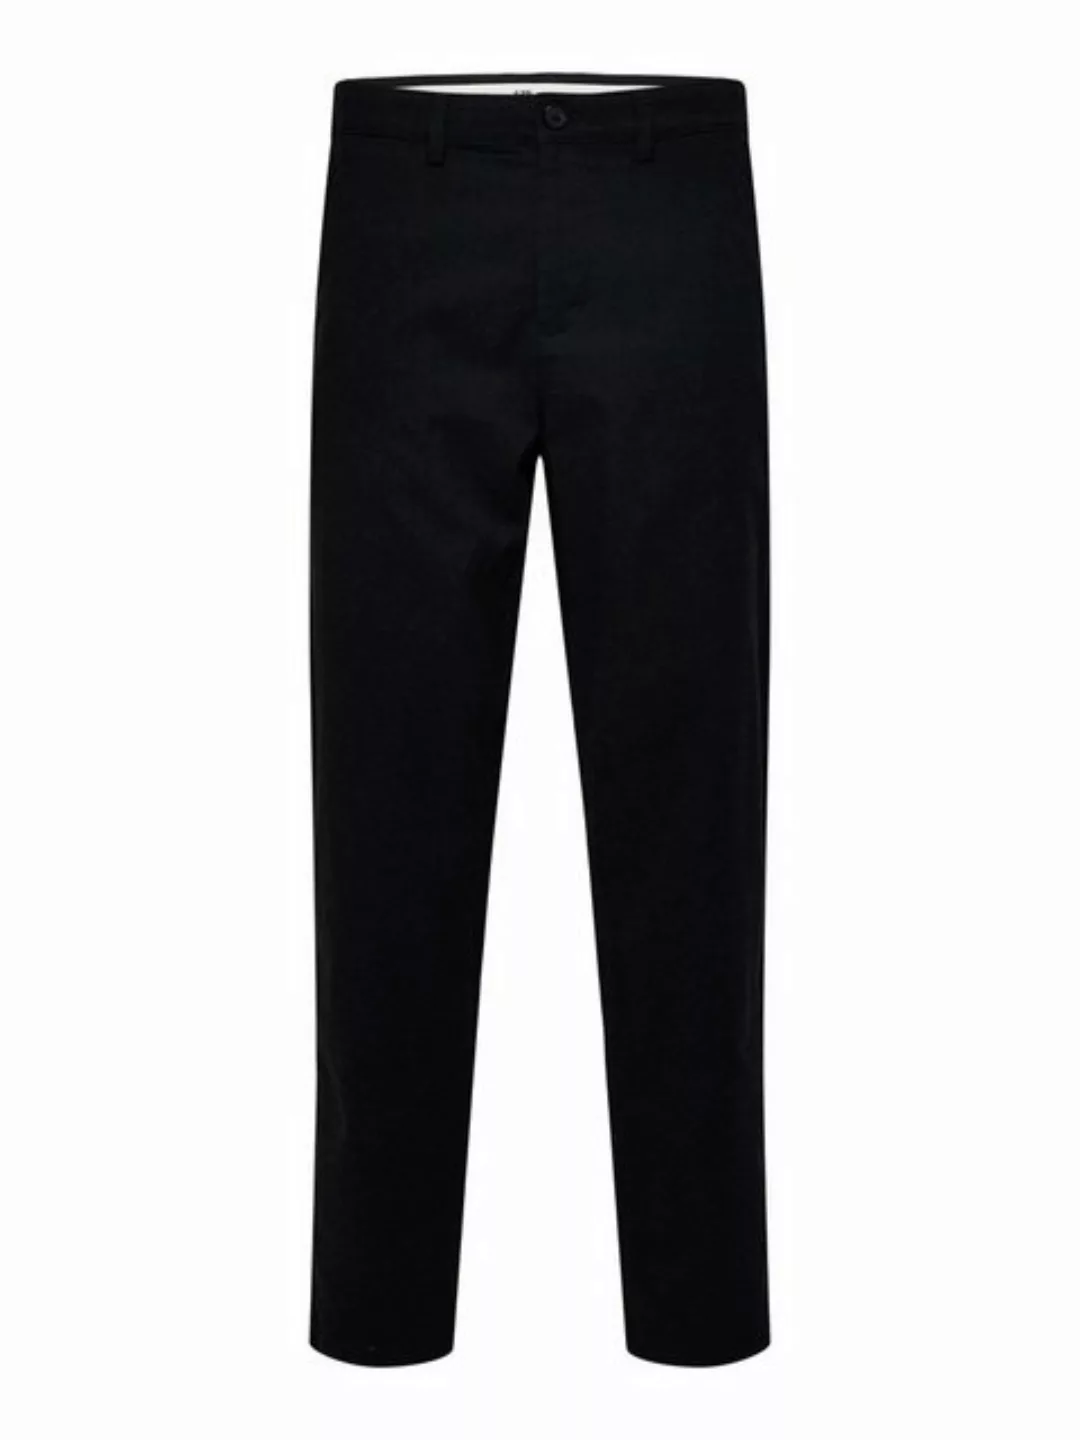 SELECTED HOMME Chinohose 175 SLIM FIT BRUSHED CHINO günstig online kaufen